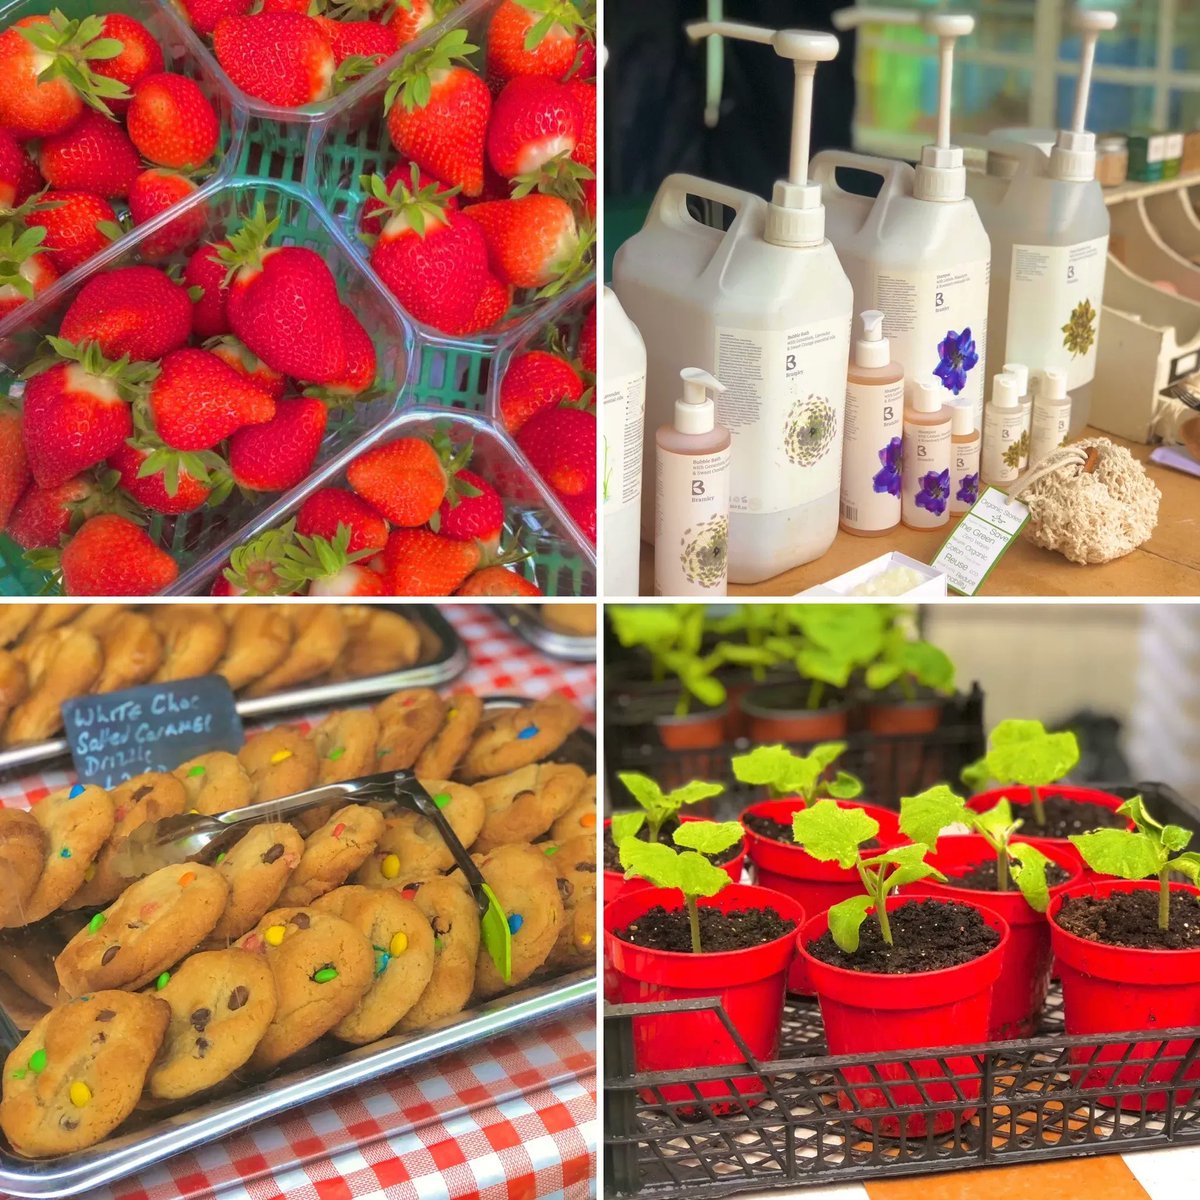 There's still time to join us at #epsom Farmers’ & Artisans Market! You have until 1:30pm to pick up homemade pies, delicious cookies, eco-friendly refills, locally brewed beer and all your favourite artisan goodies! 🍪🍒 
#surrey #surreymarkets #farmersmarket #artisanmarket